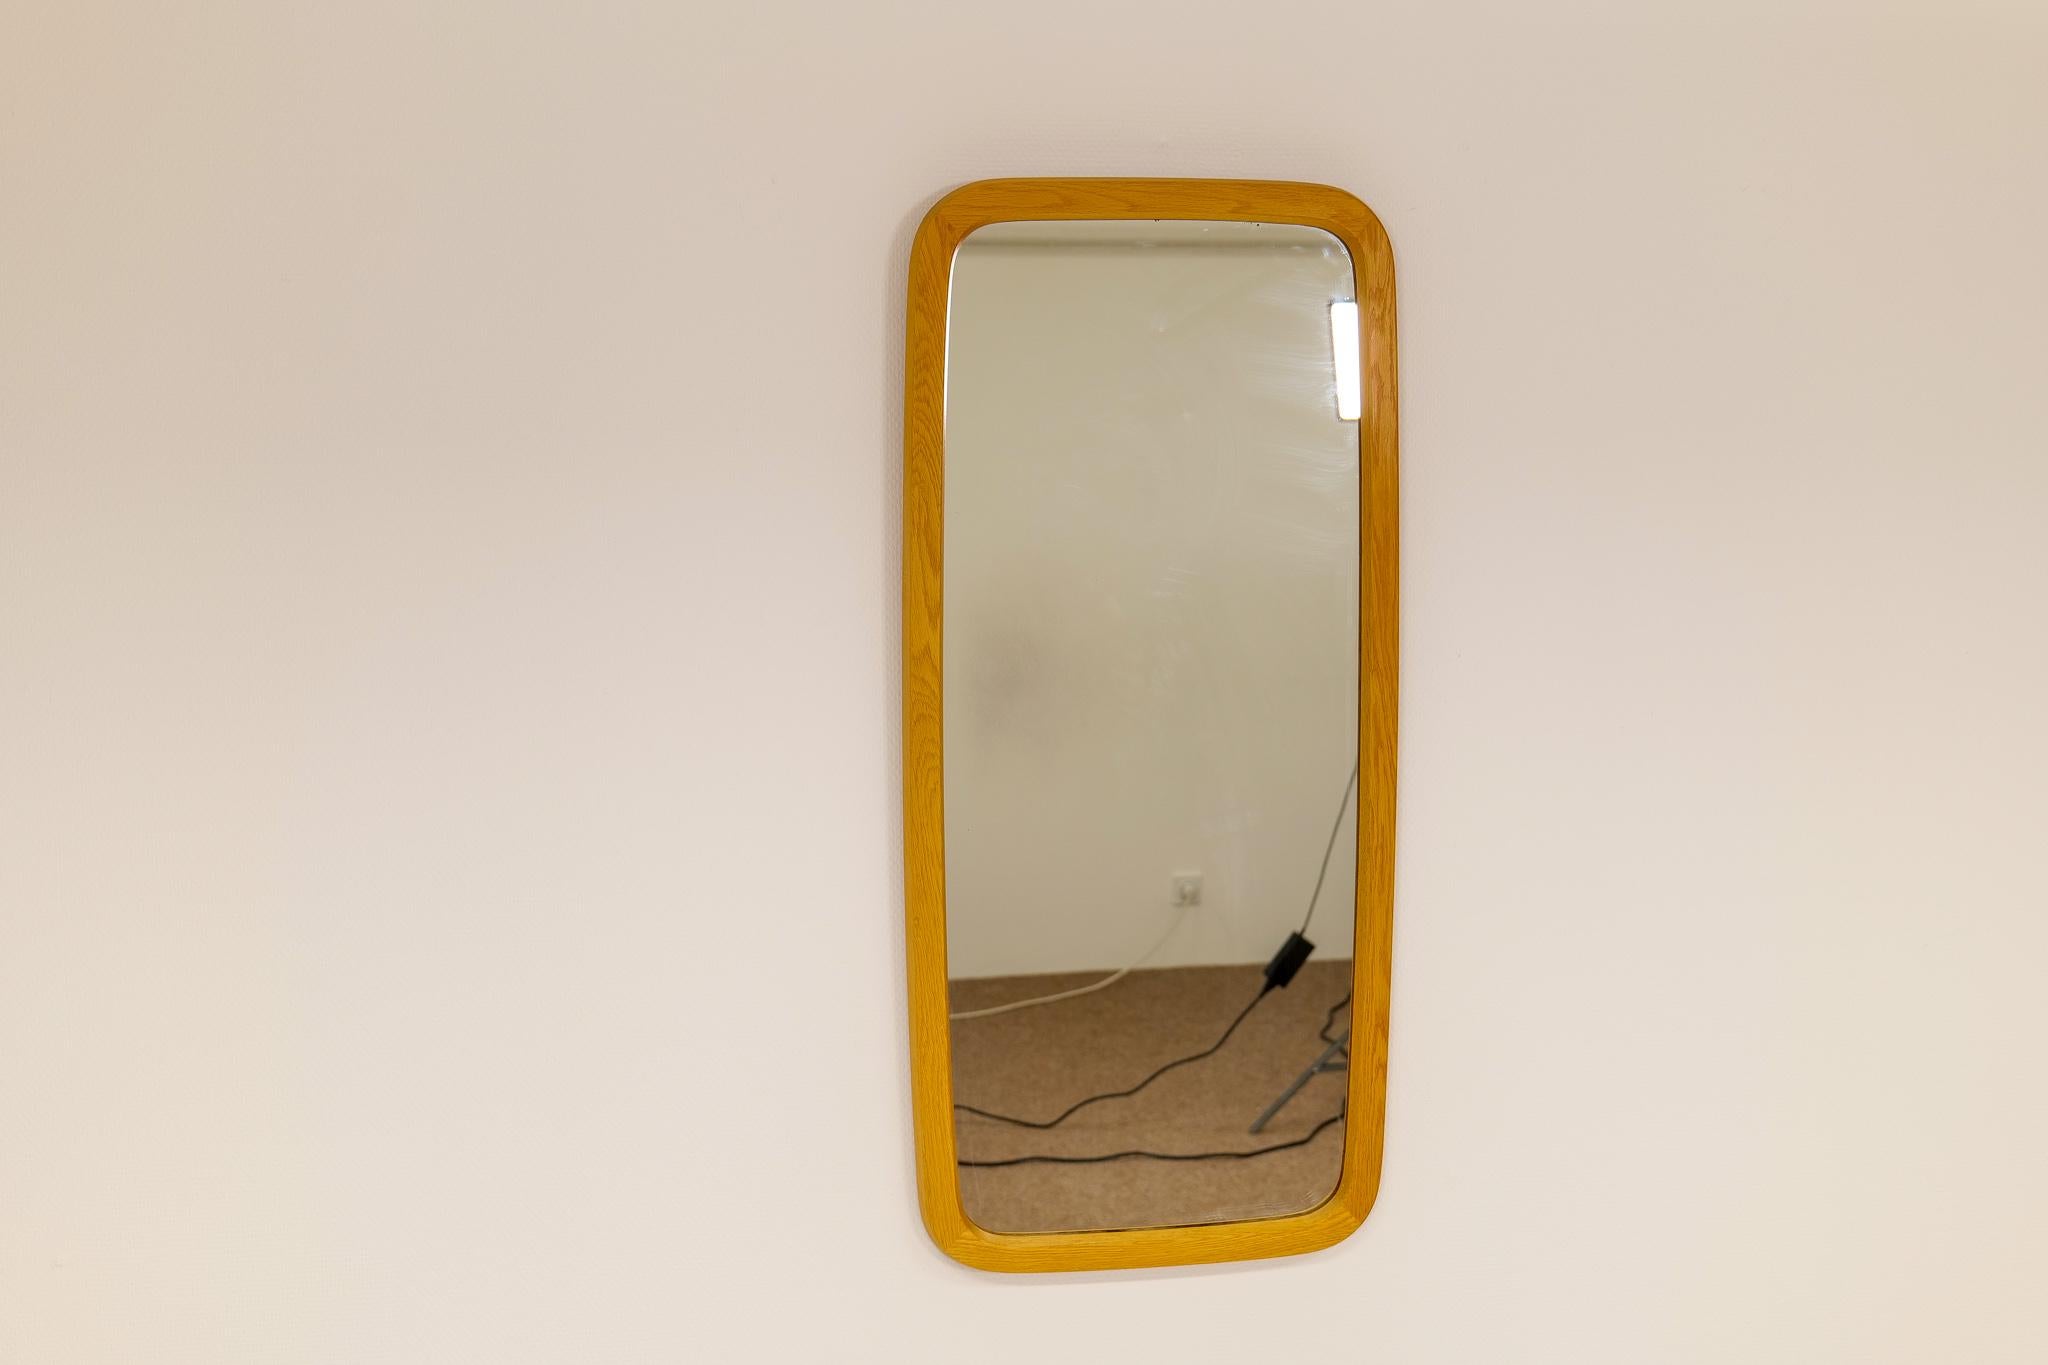 Wonderful modernist wall mirror made in the midcentury in Sweden. Made in crystal mirror glass and finely sculpted solid oak. Produced by Fröseke, AB Nybrofabriken, Sweden, 1960s. Labeled

Good vintage condition

Dimensions: Height: 37.41 in.